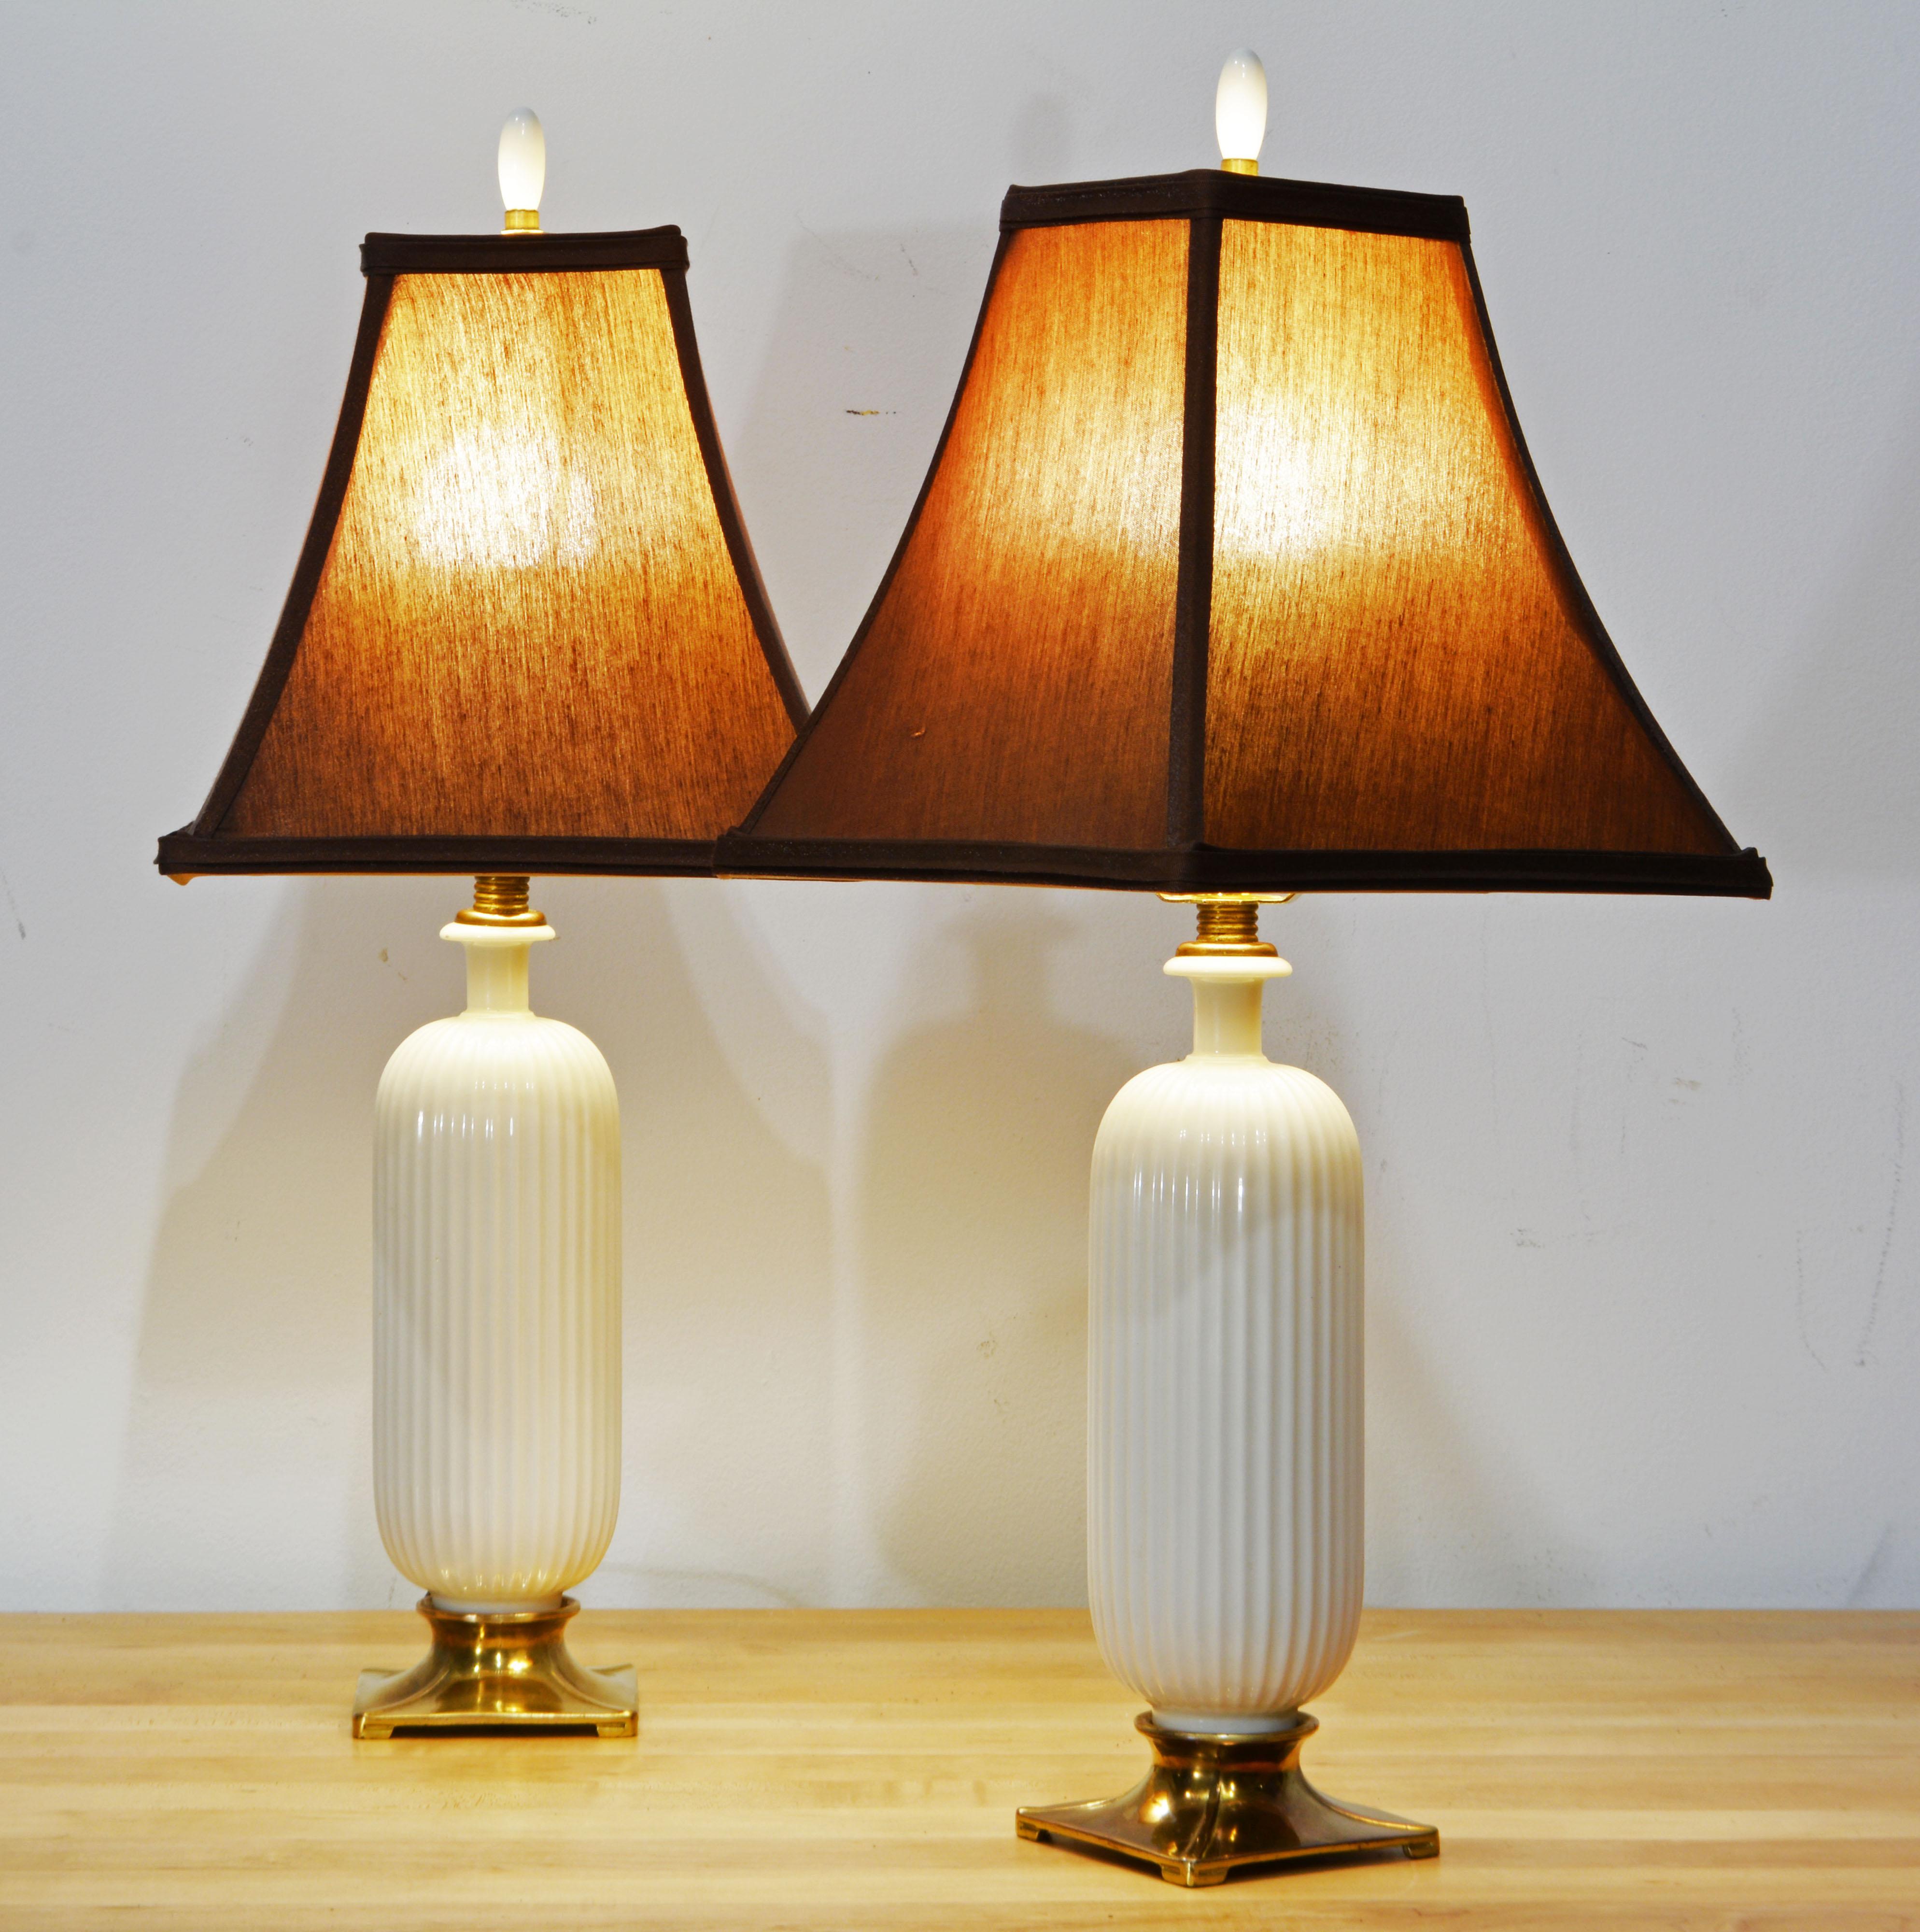 American Pair of Deco Style 1950's Fluted Porcelain and Bronze Lamps by Dav Art, NY/Lenox For Sale